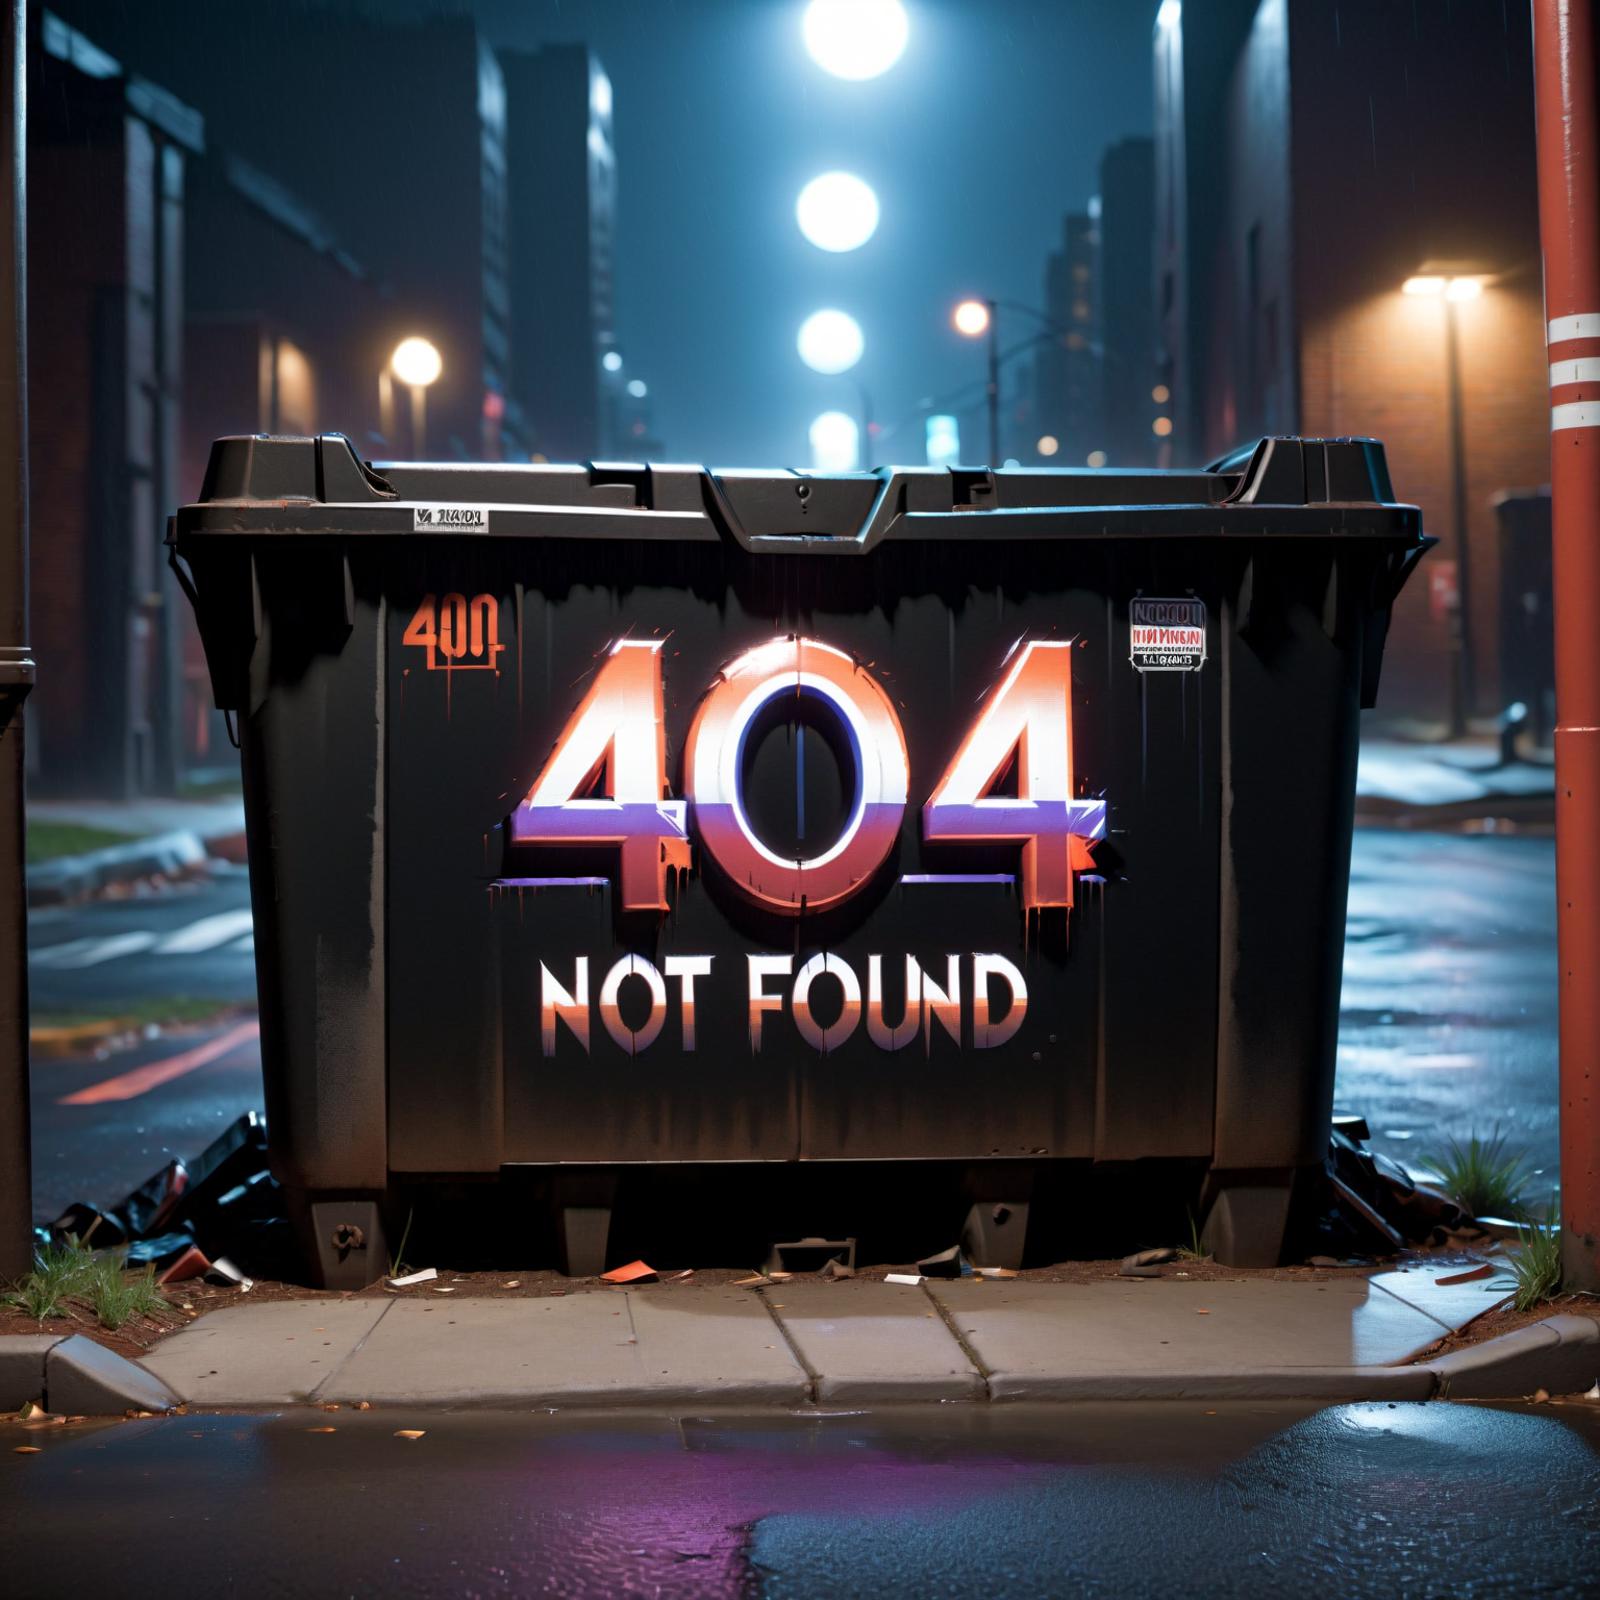 The 404ra - add-on for Harrlogos! image by RoaringMuffins